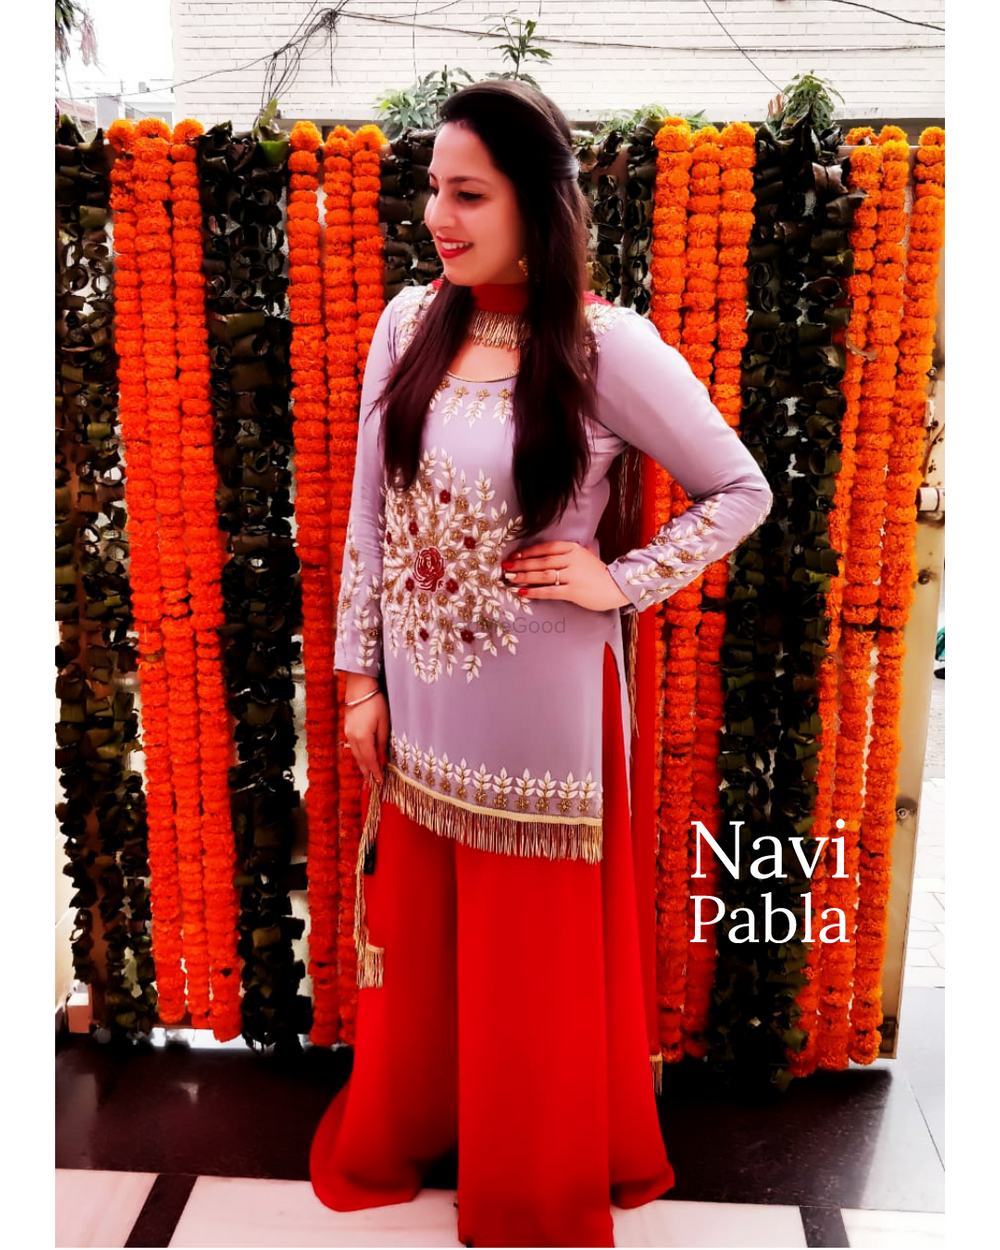 Photo From Real Weddings - By Navi Pabla